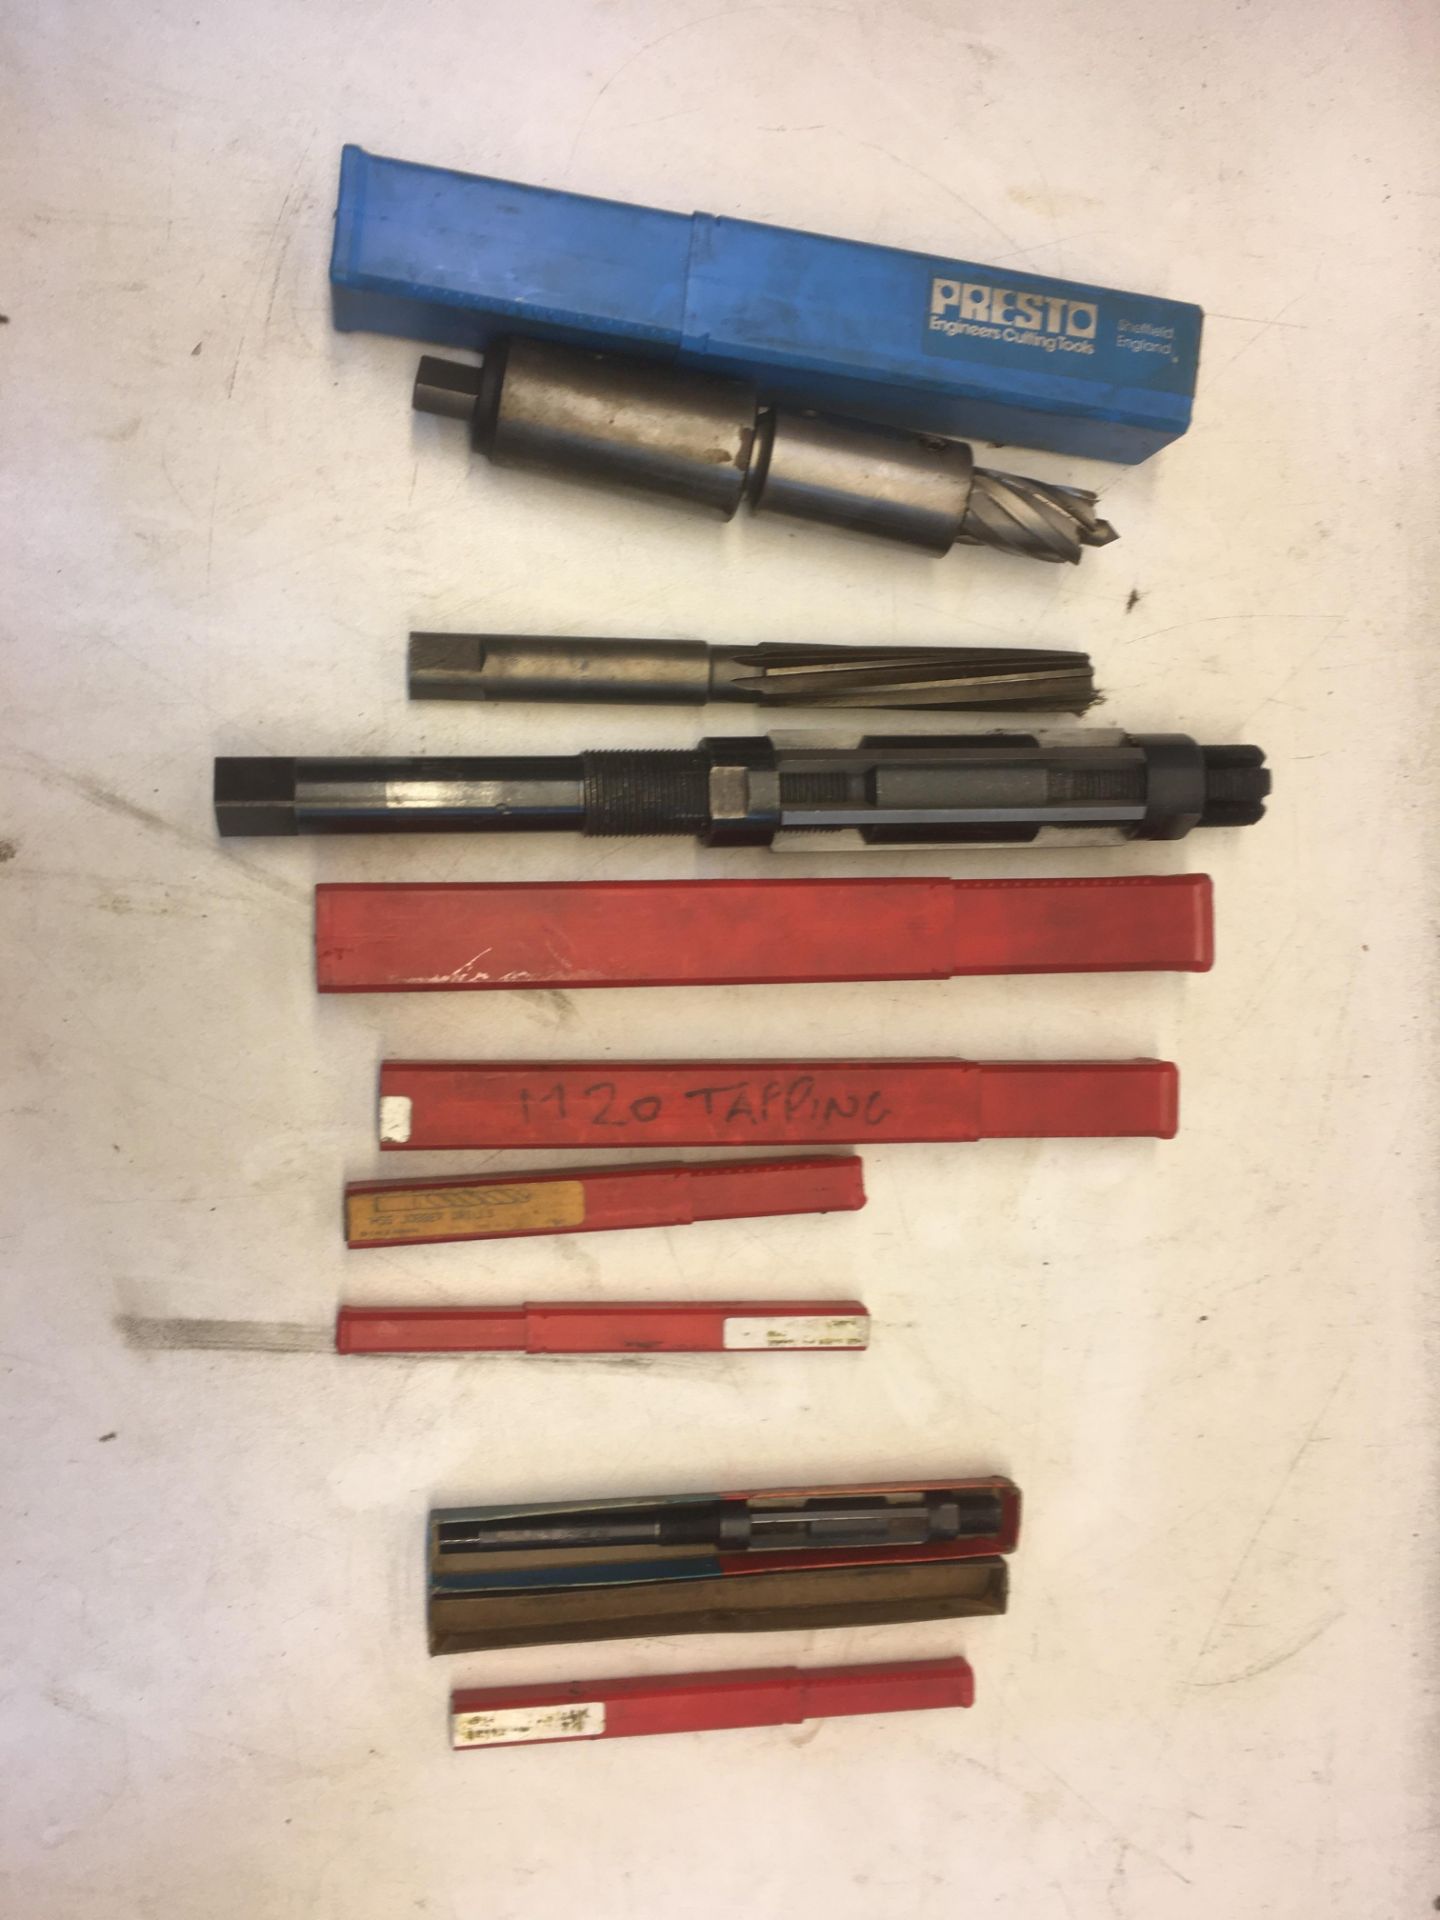 10 x Various Bits/Hand Reamer Bits as Pictured